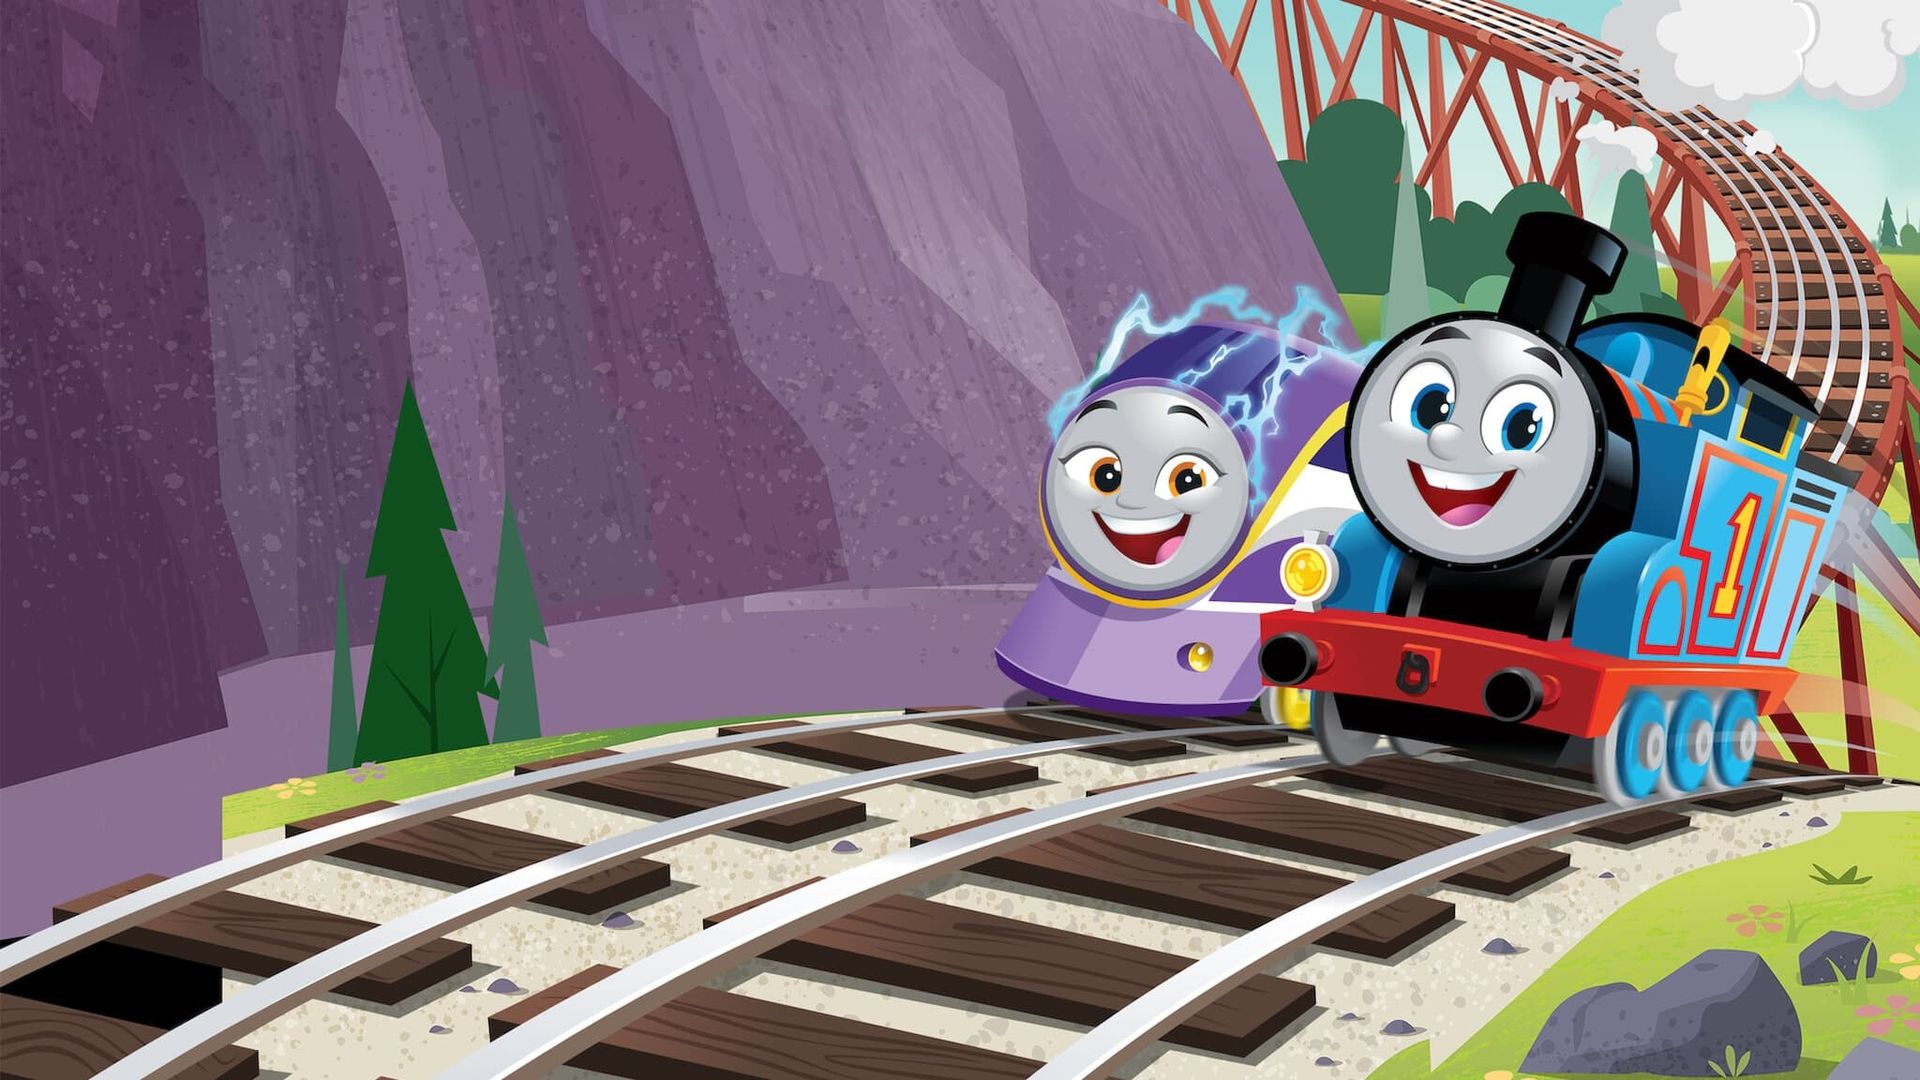 Thomas & Friends: All Engines Go - Race for the Sodor Cup background